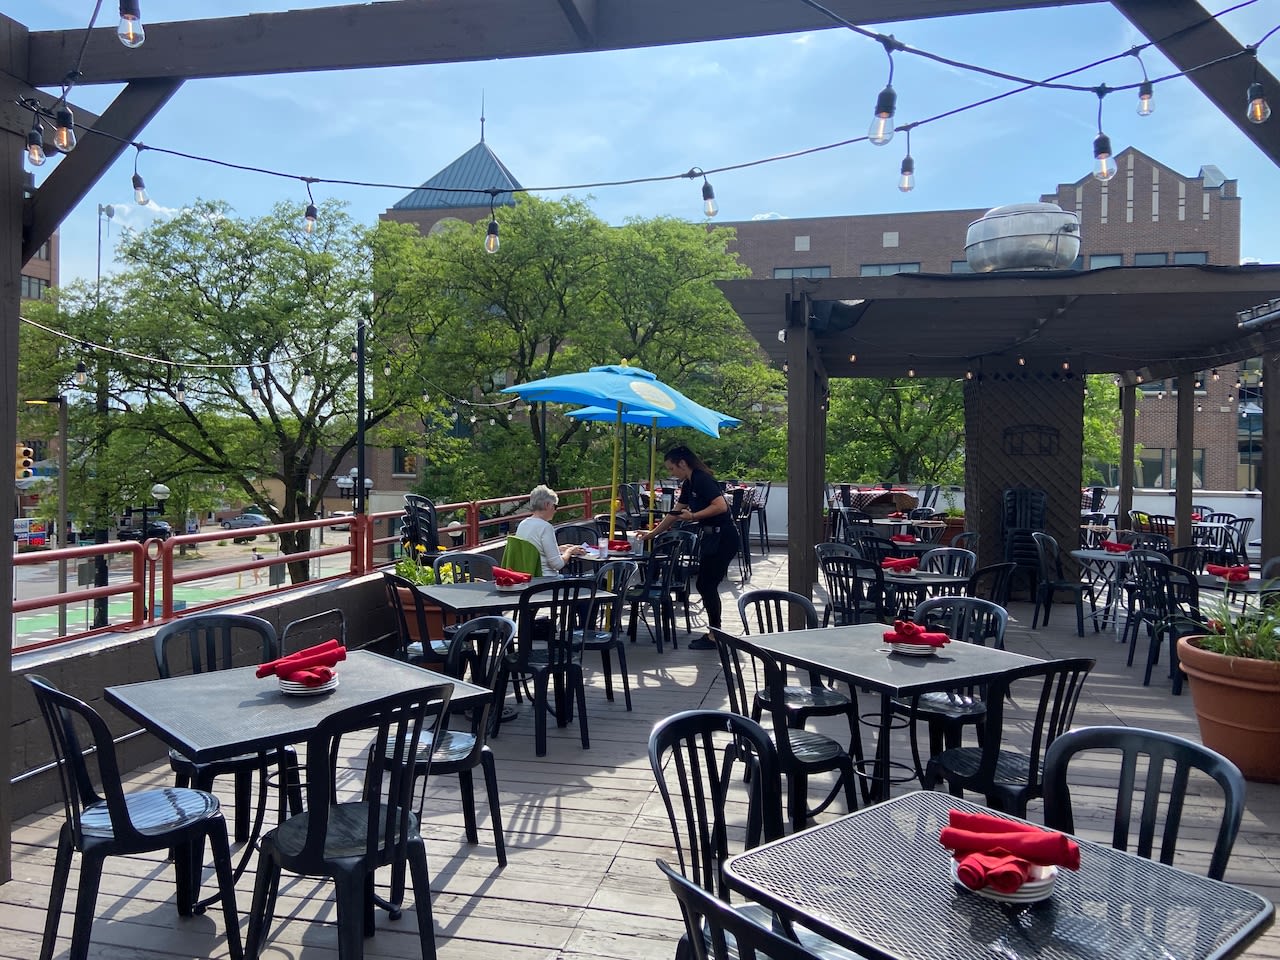 5 great places for outdoor dining around Ann Arbor